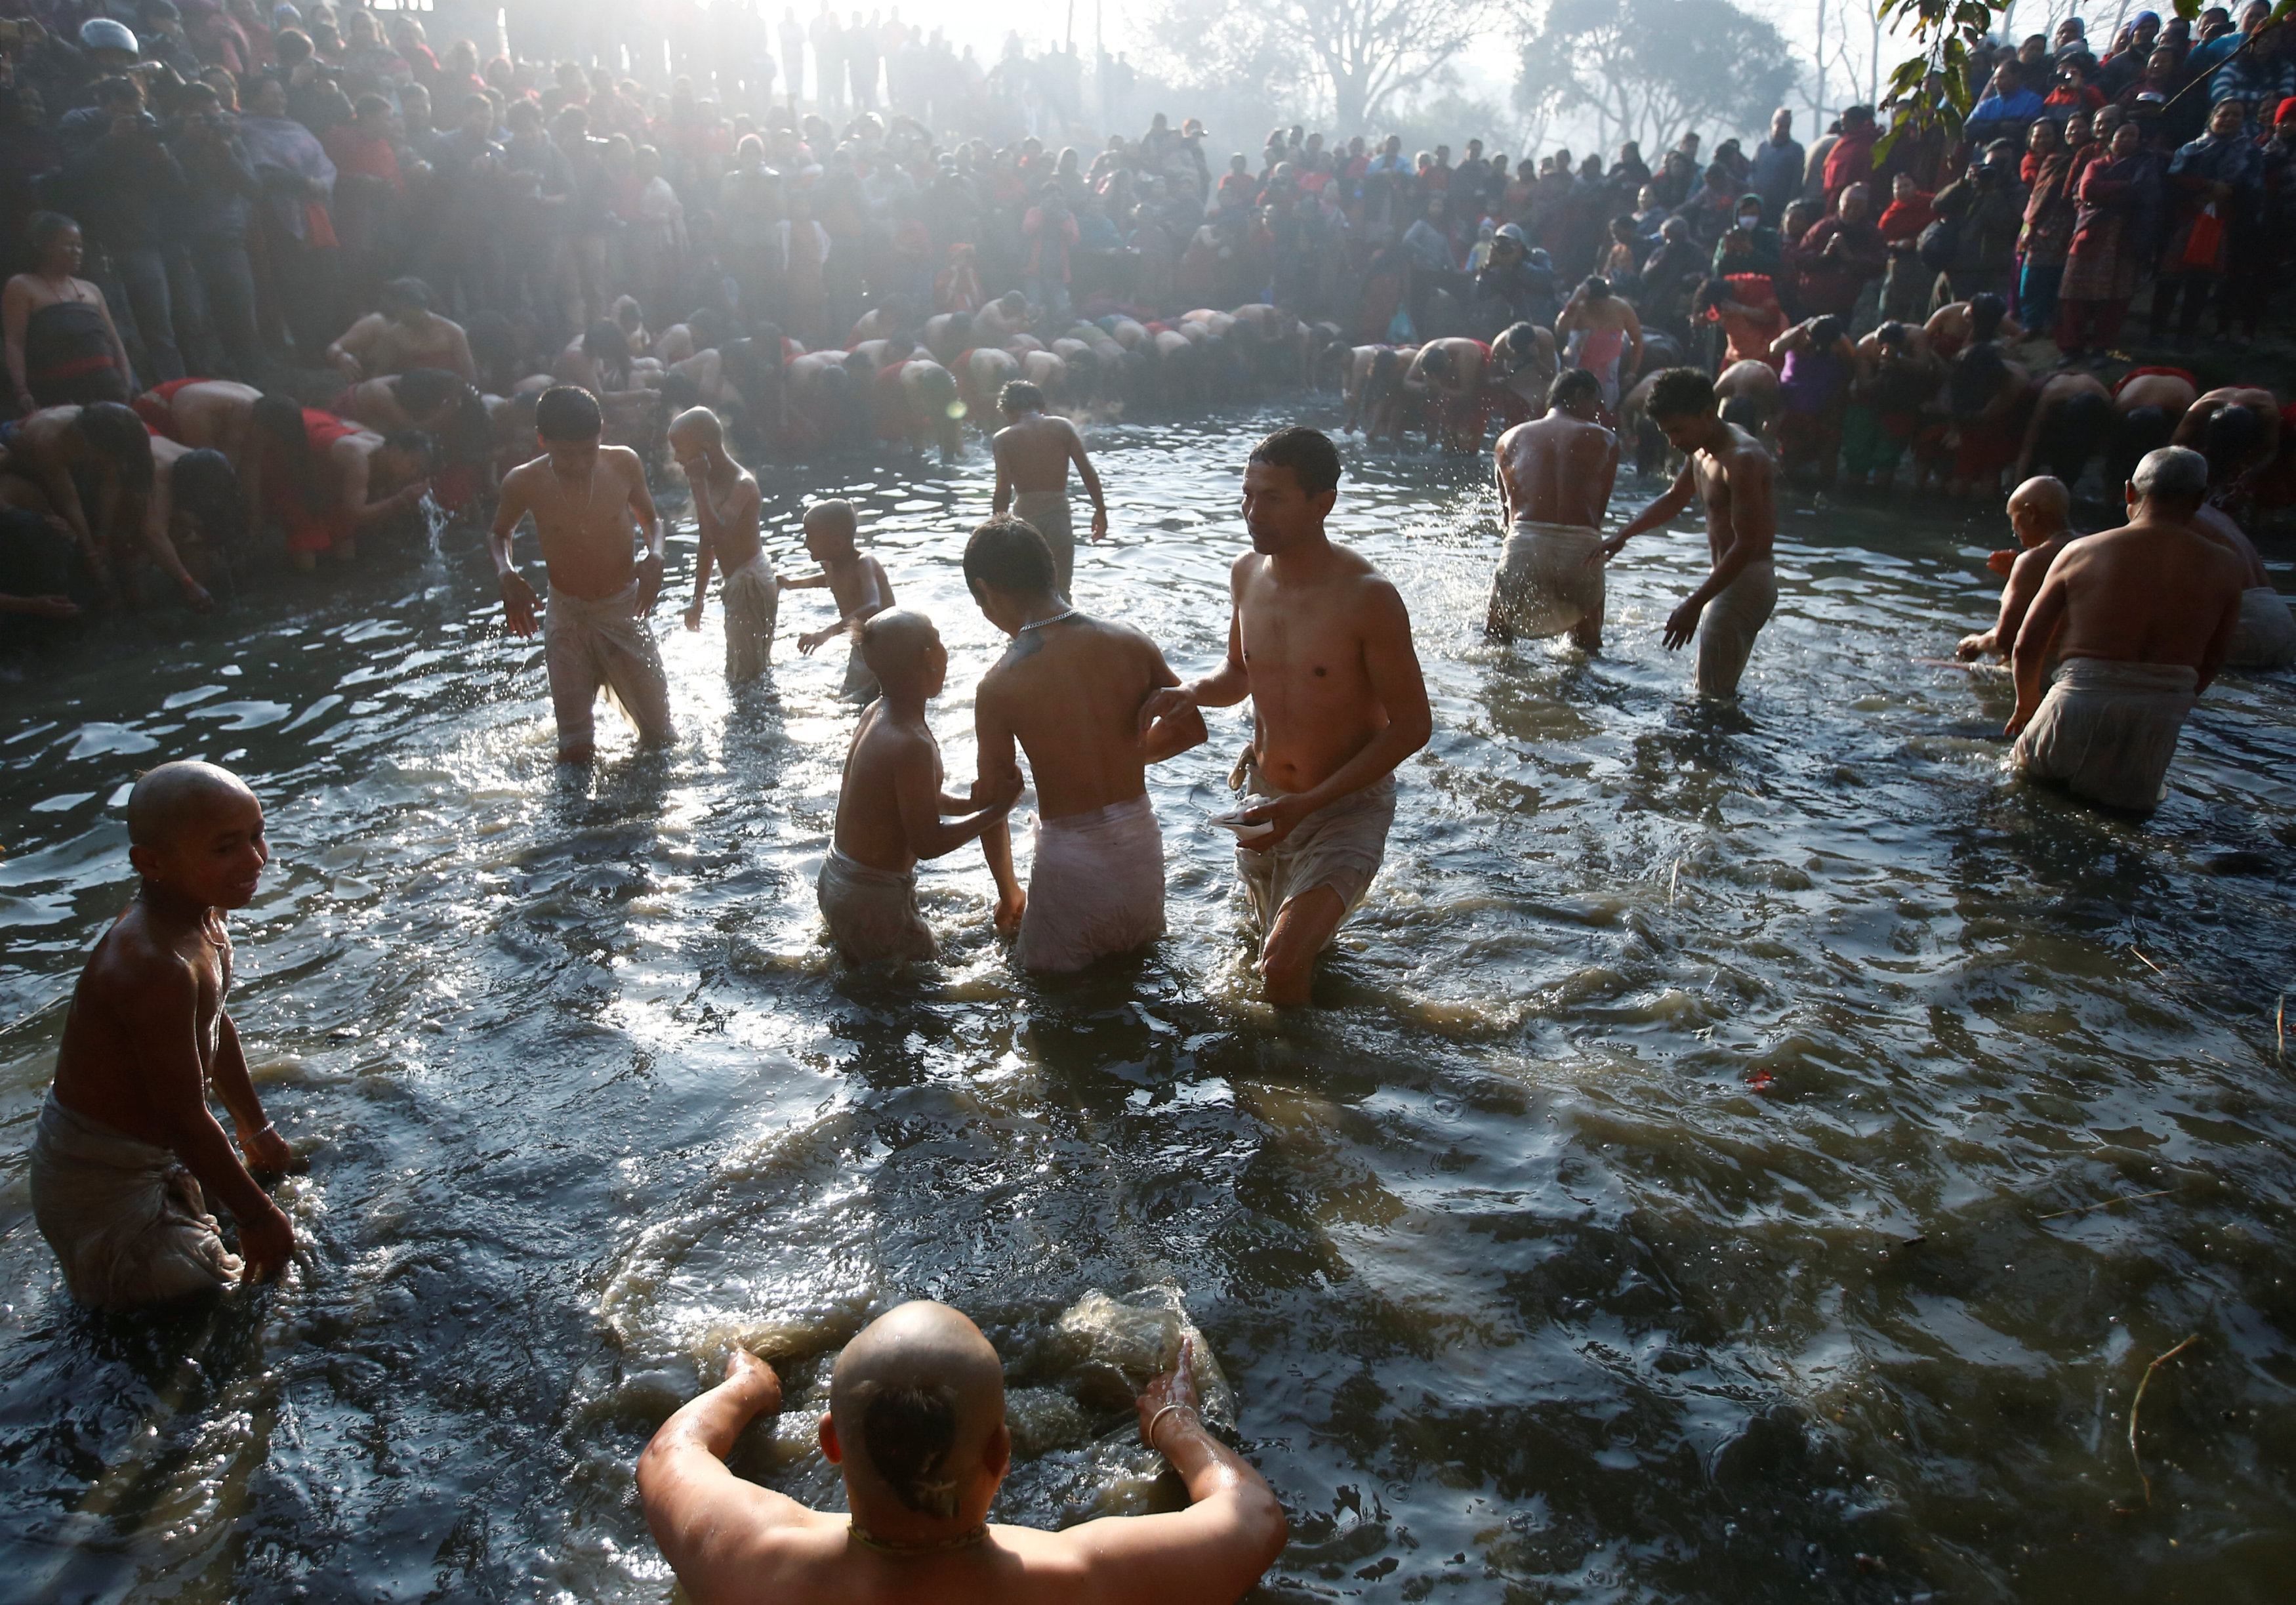 Devotees offer prayers by taking a bath in the Hanumante River, on the final day of the month-long Swasthani Brata Katha festival in Bhaktapur, Nepal February 10, 2017. REUTERS/Navesh Chitrakar